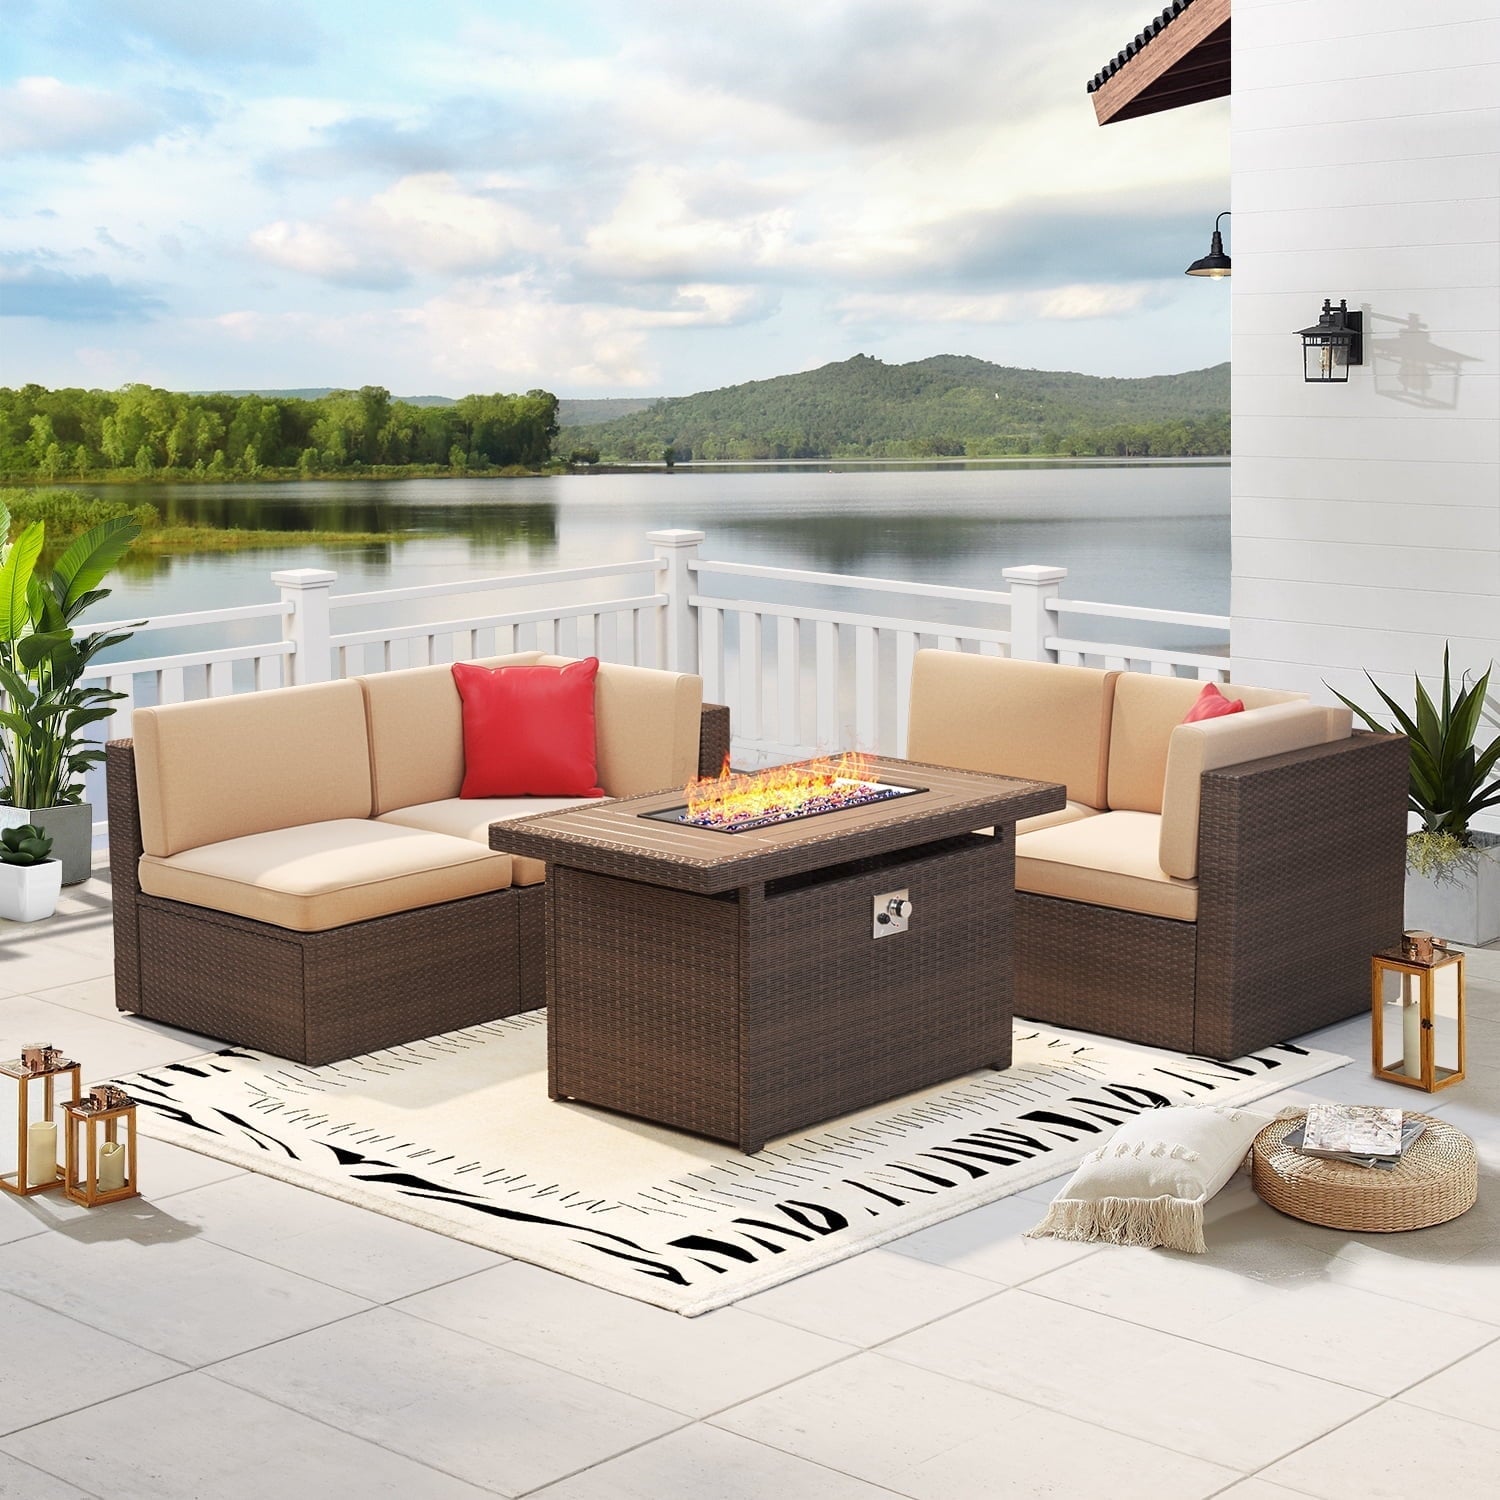 5 Piece Patio Furniture Set, Outdoor Patio Furniture Sets with Fire Pit, Wicker Patio Furniture, Outdoor Conversation Set with Brown Cushions